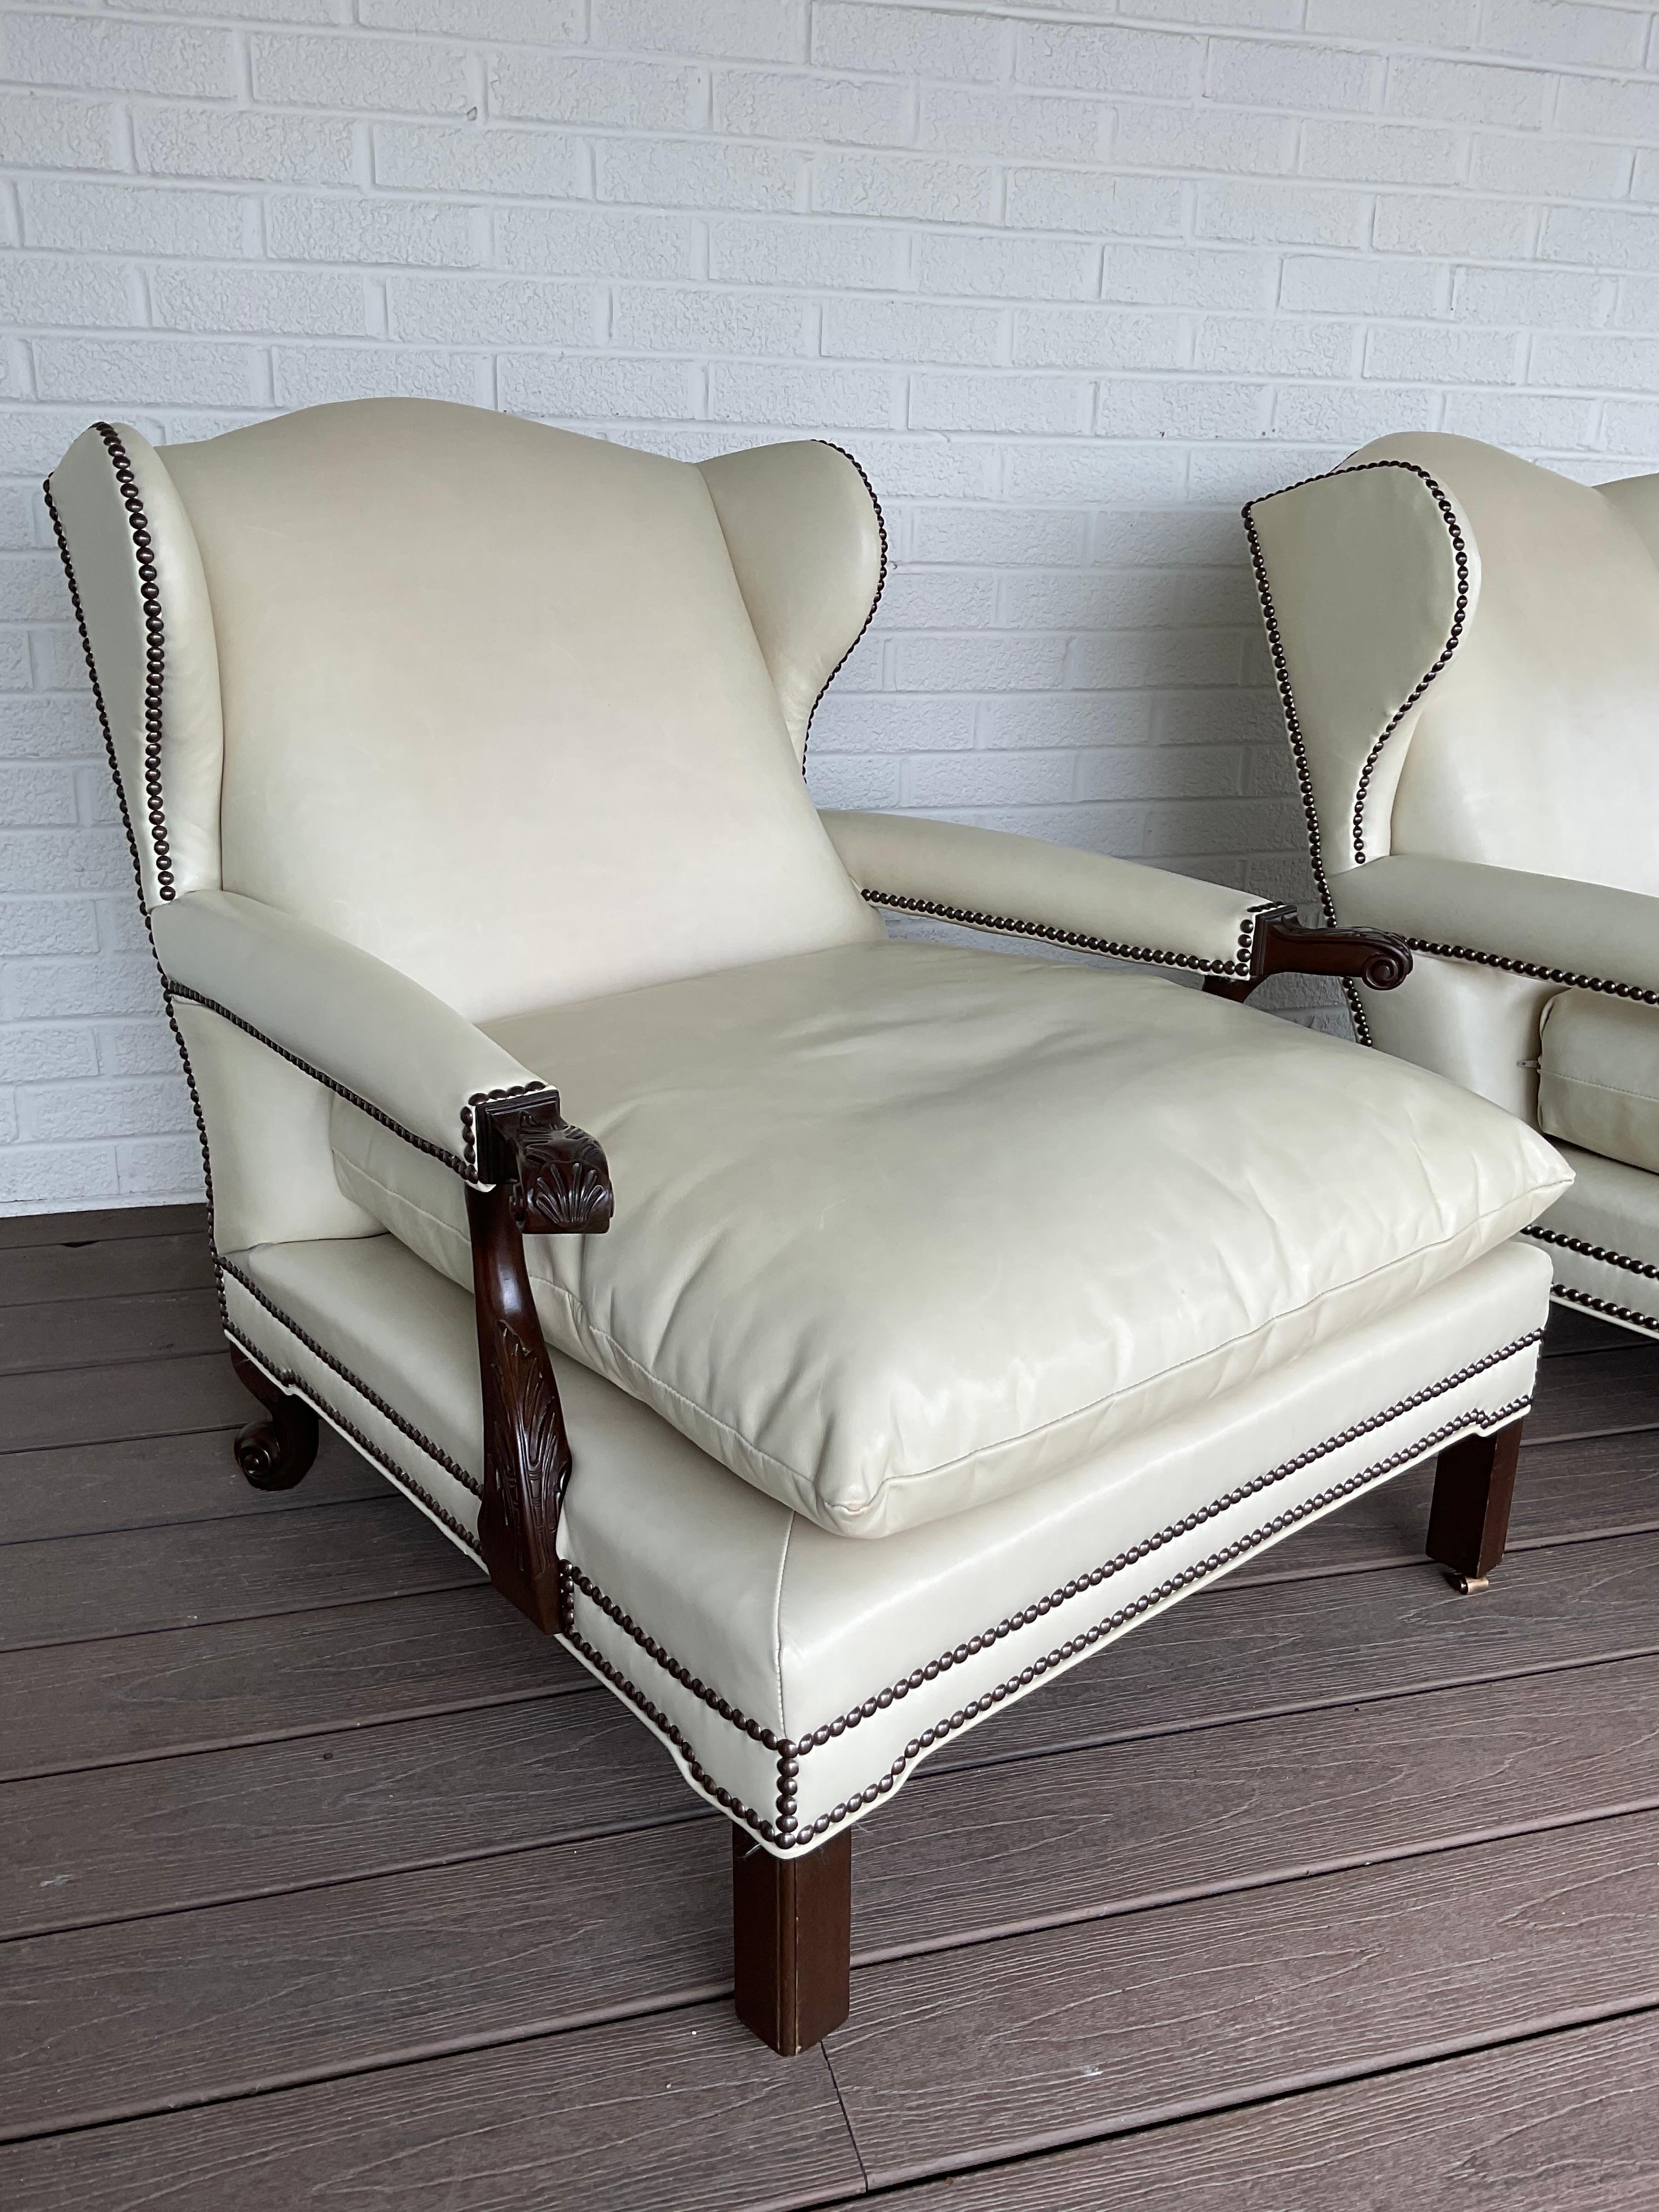 Uber Rare and oh so cool vintage leather clubs from Hickory Furniture. Buttery soft ivory leather has the perfect patina. Deep seat cushions offer extra comfort for the taller folks. These are very very cool. Beautiful one owner pieces. These